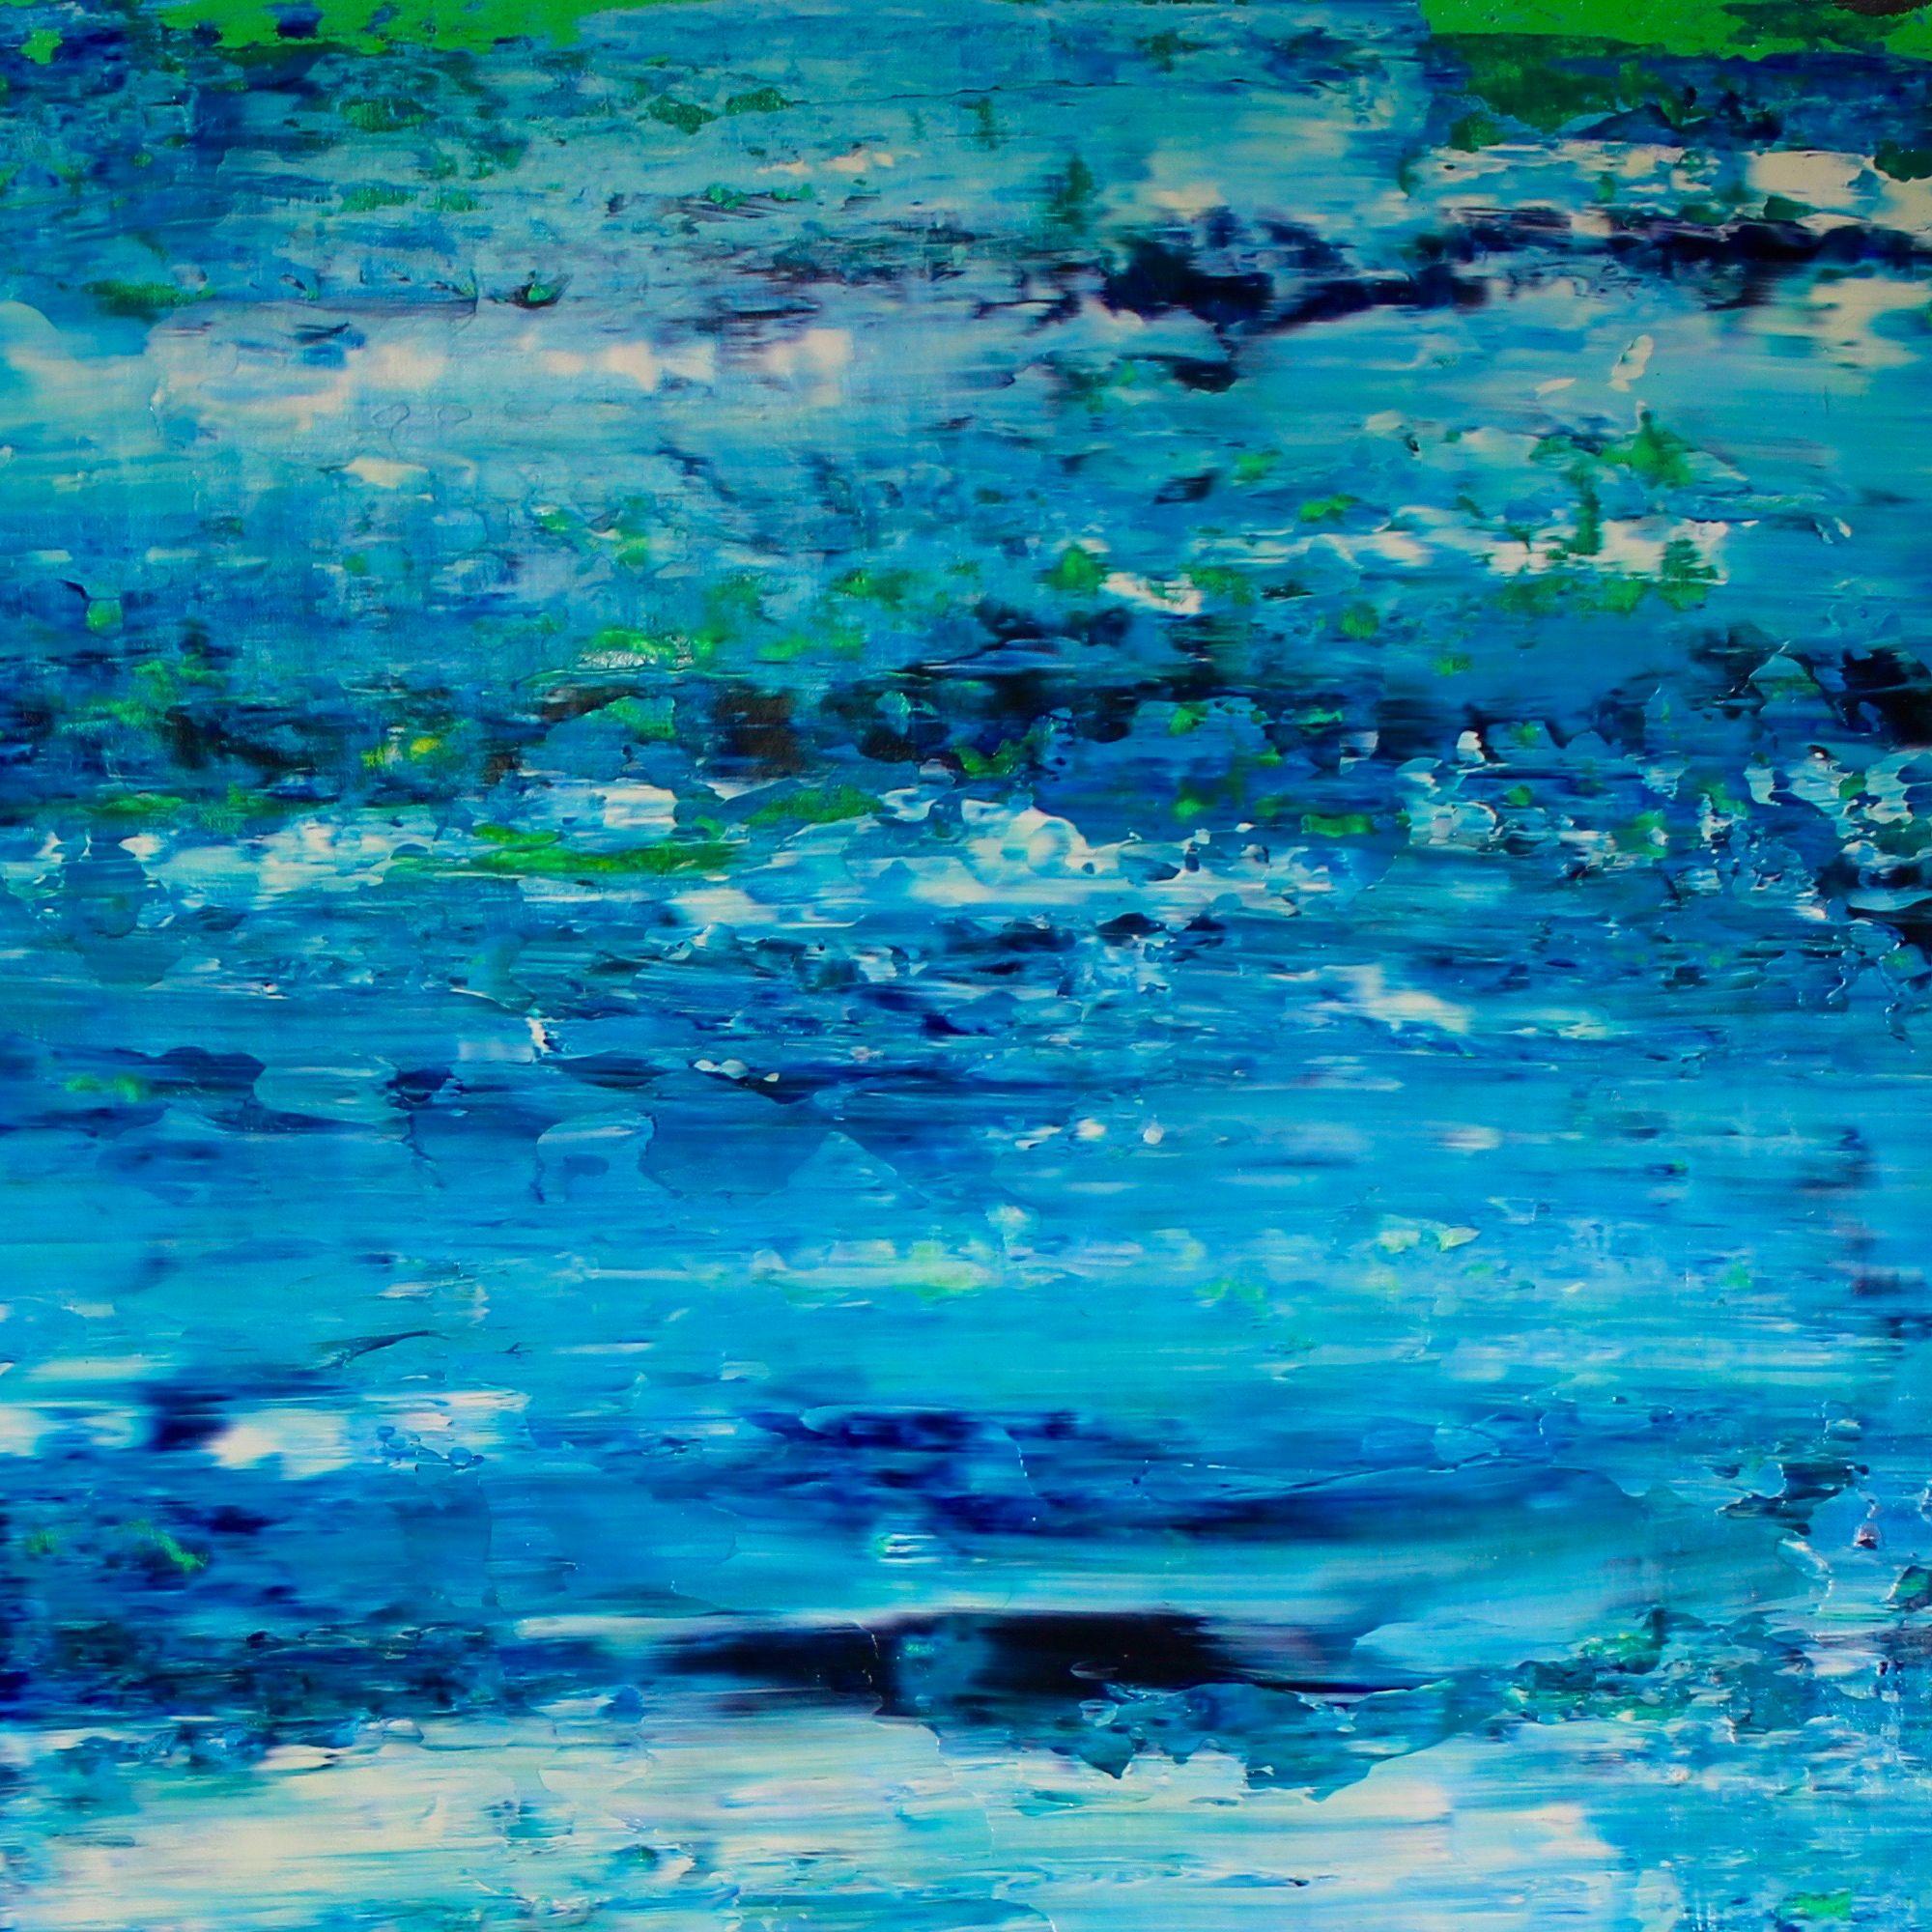 Nature inspired contemplative with layers of blues and green undertones. Signed! Beautiful painting!    This work was created on a high quality loose canvas and is shipped rolled in a tube. Simply take it to your local framer to have it mounted.